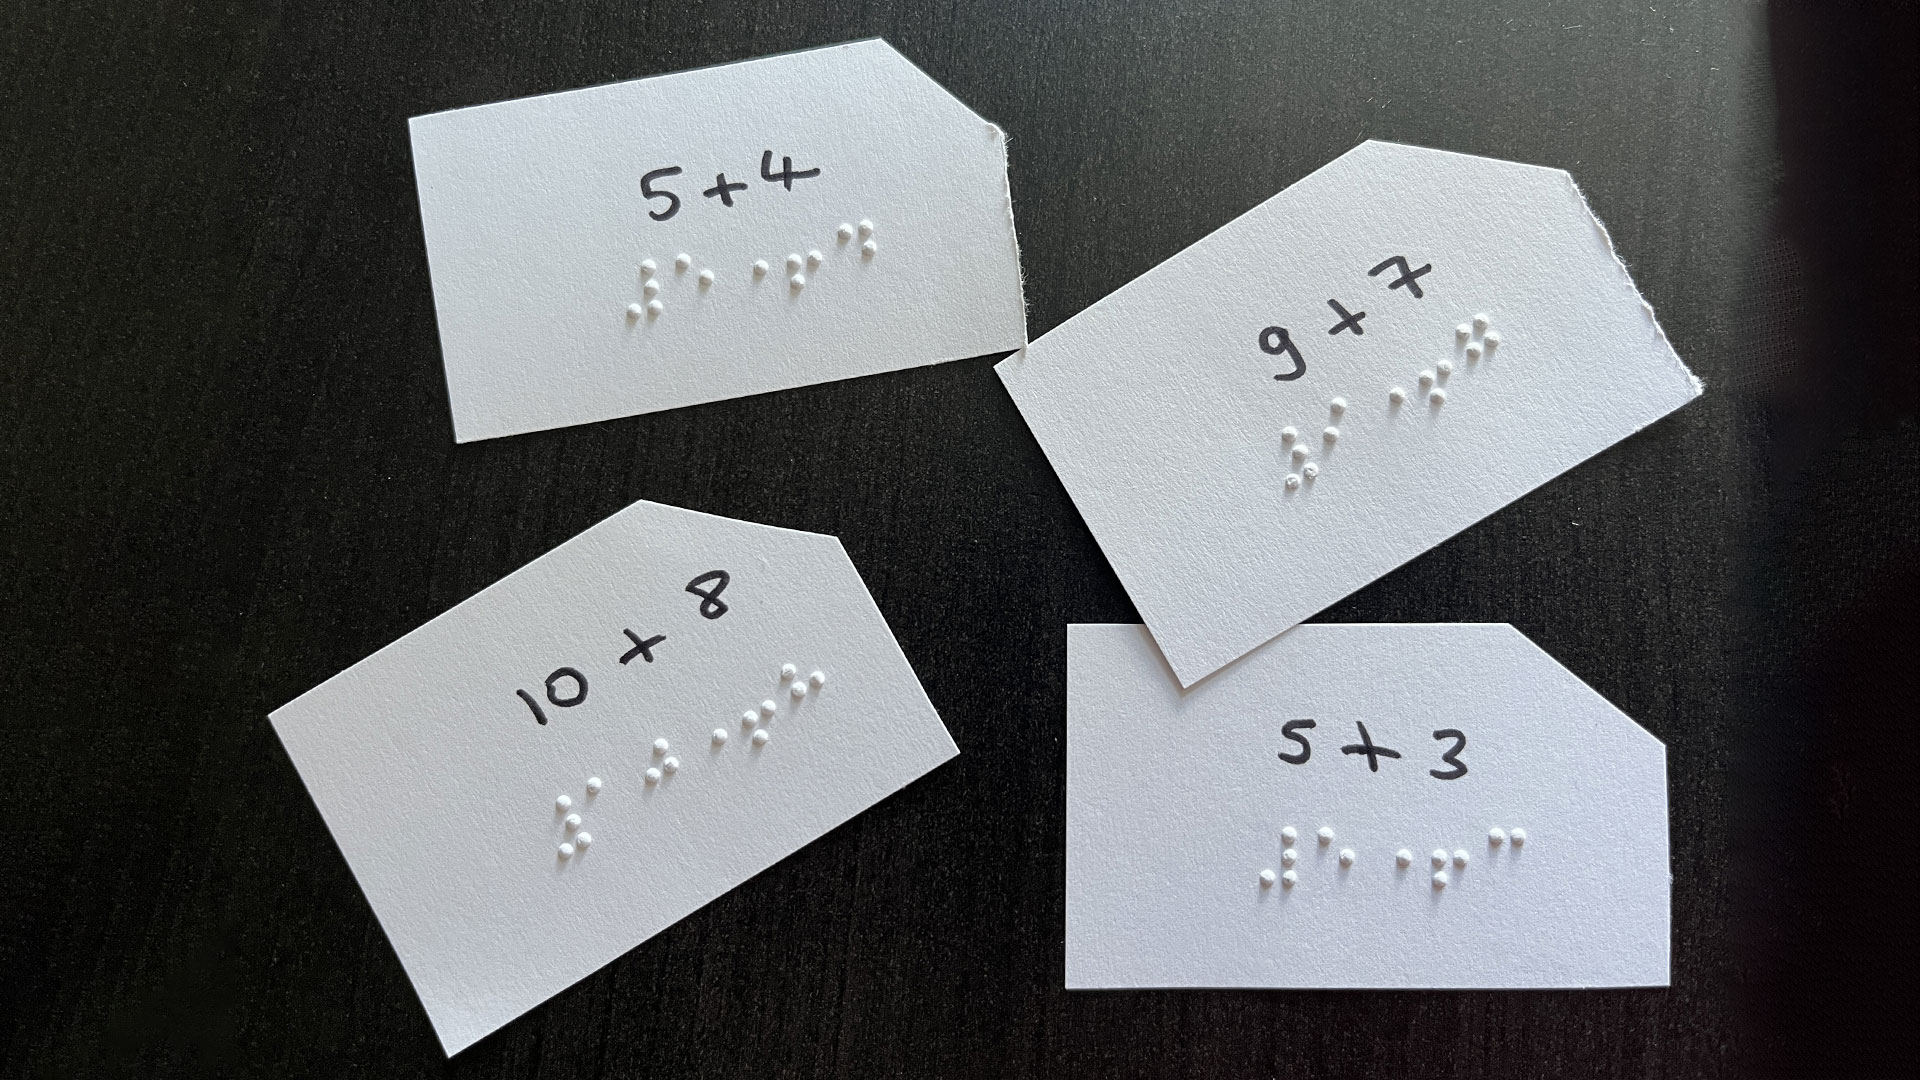 Addition is written in braille on cards and in black so that blind and sighted people can play together. The right corner of the label is cut off to make orientation easier.